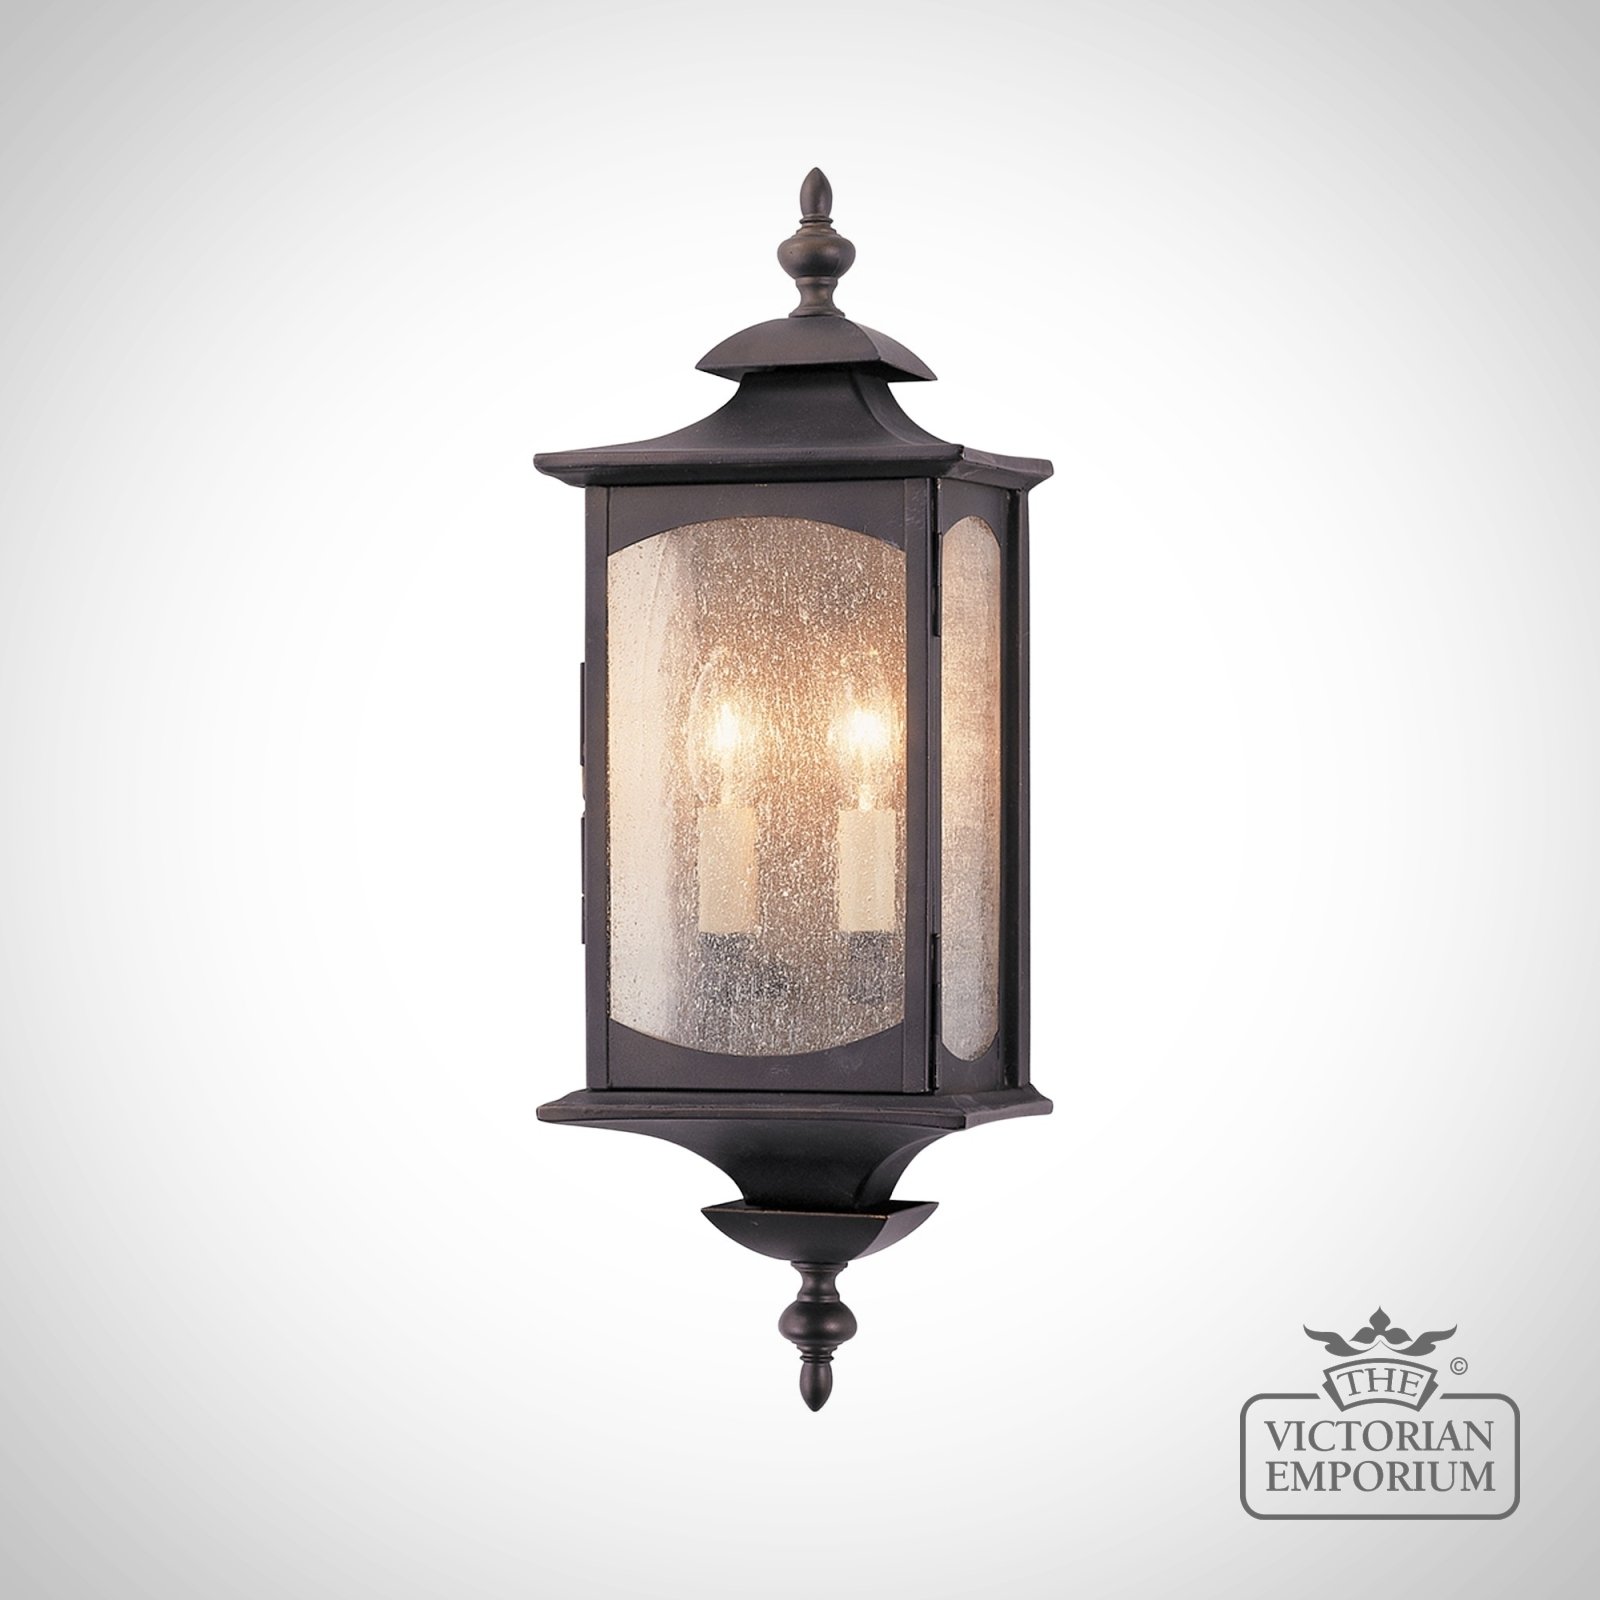 Market Square Wall Lantern in Oil Rubbed Bronze - Medium or Large